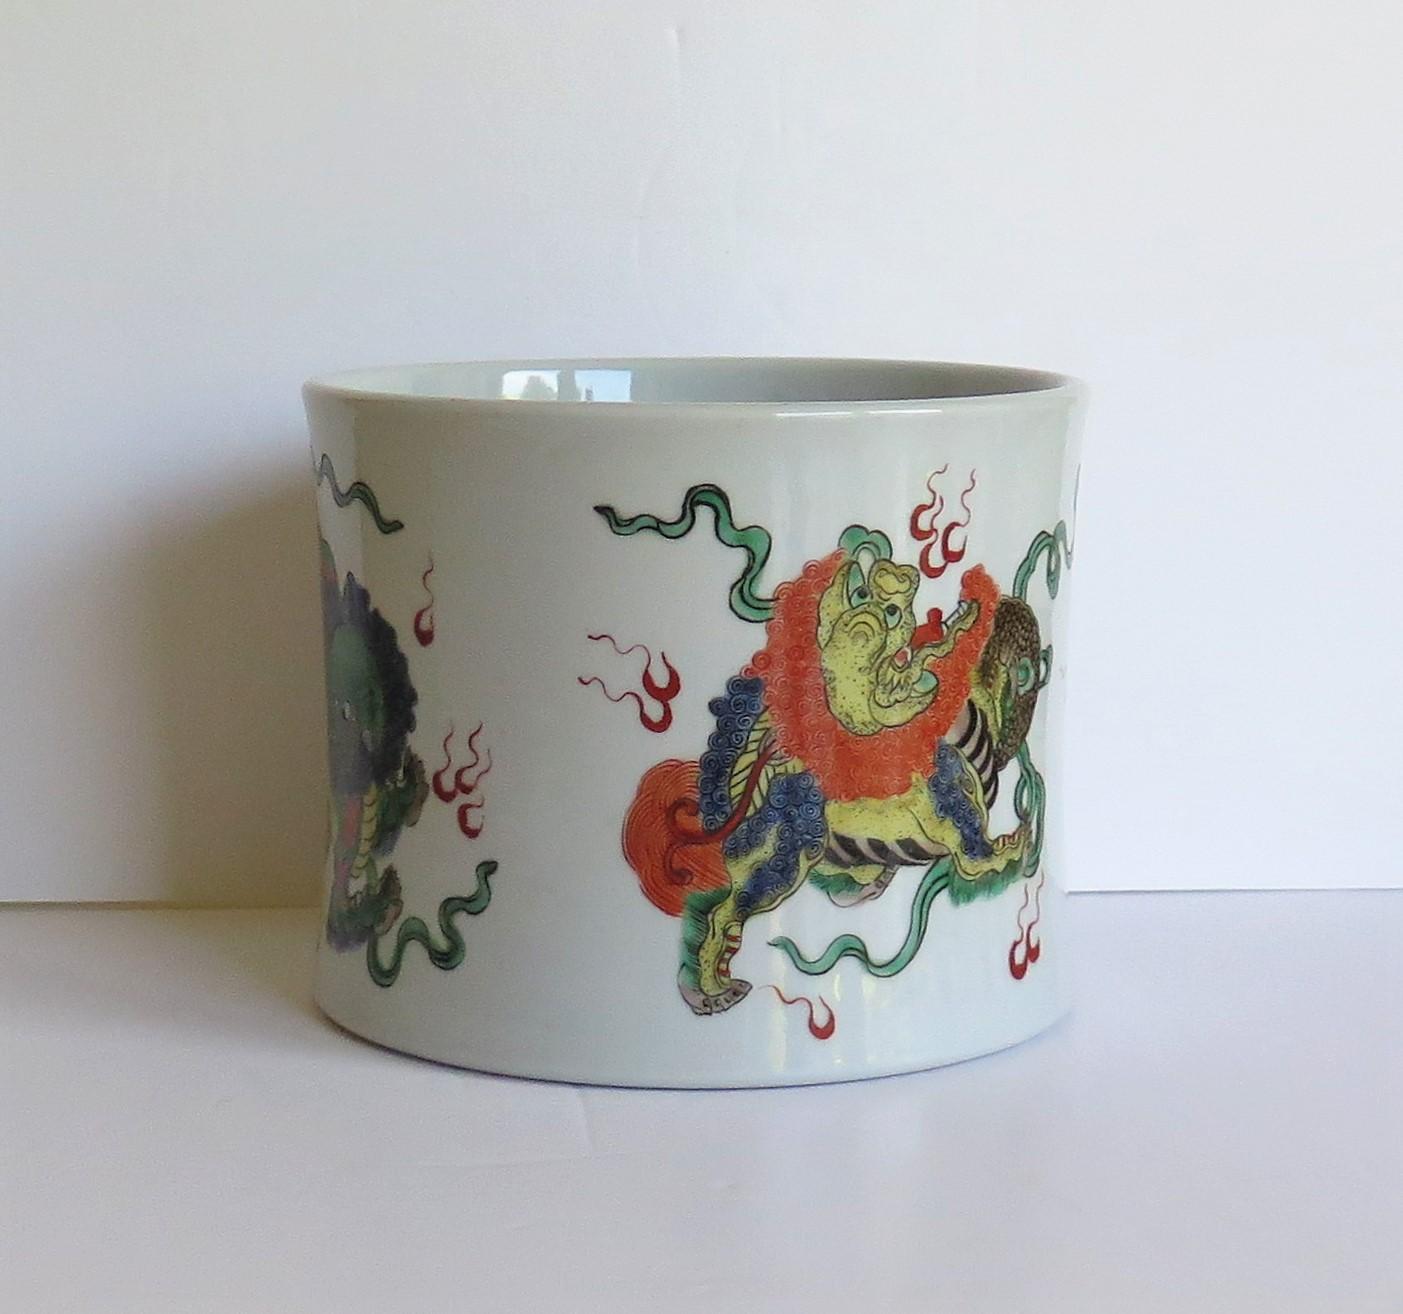 This is a very good Chinese export porcelain brush pot or Bitong hand painted in polychrome enamels with an apocryphal six figure Kangxi mark but dating to the mid-20th century.

This piece is very well potted and has a very attractive squat shape